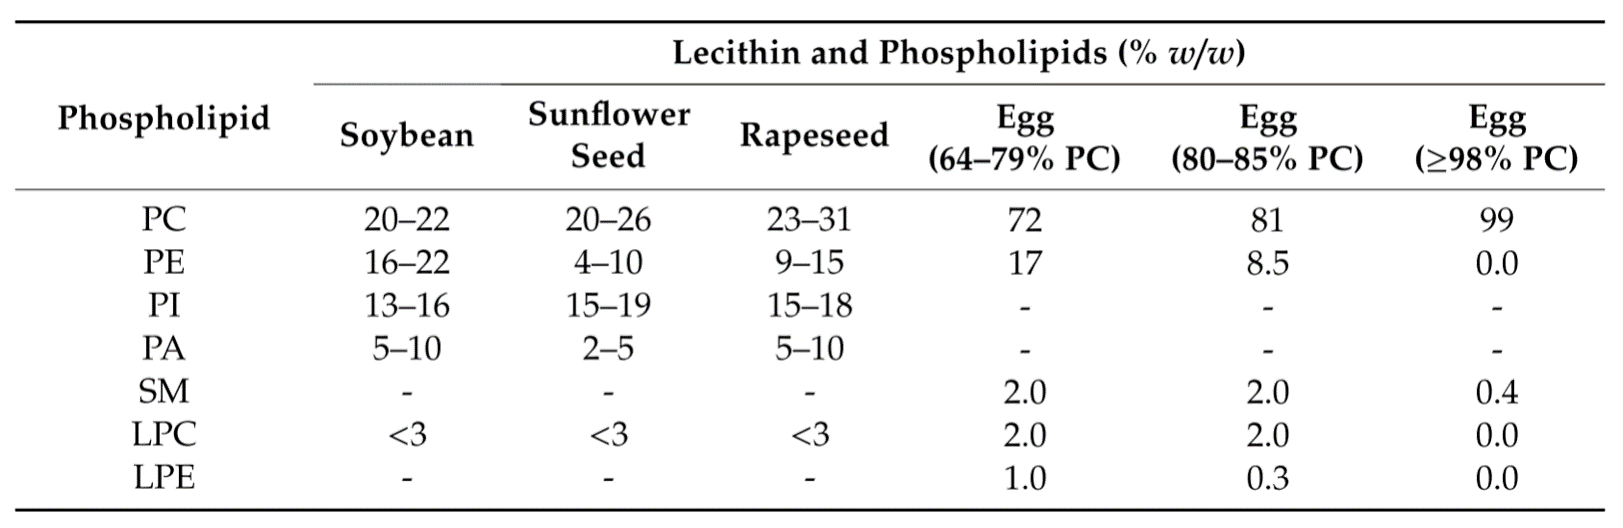 Phospholipid composition of vegetable de-oiled lecithins and egg phospholipids of different PC contents